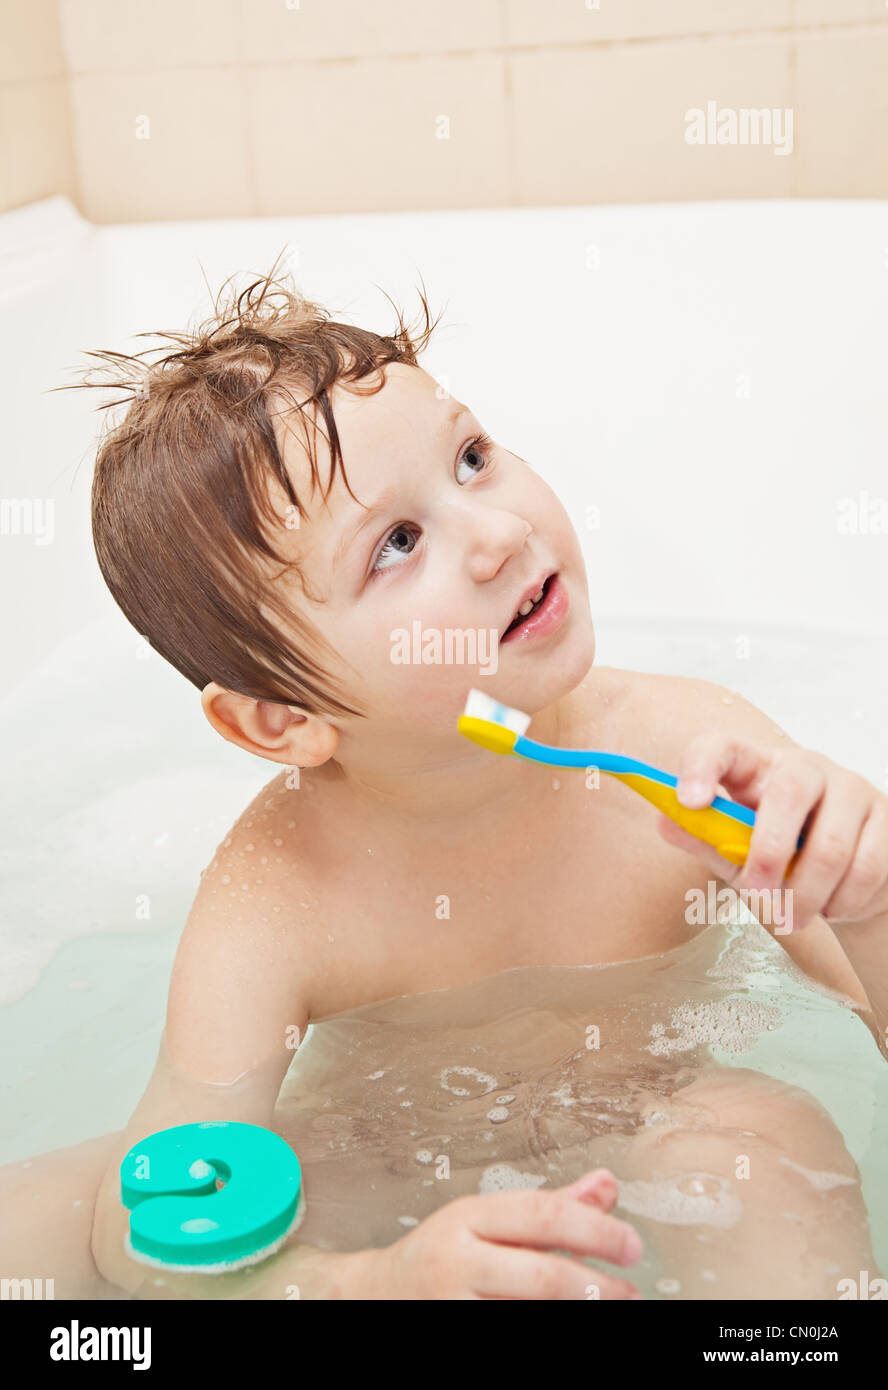 Cute little boy sitting in the full bath and holding toothbrush Stock Photo